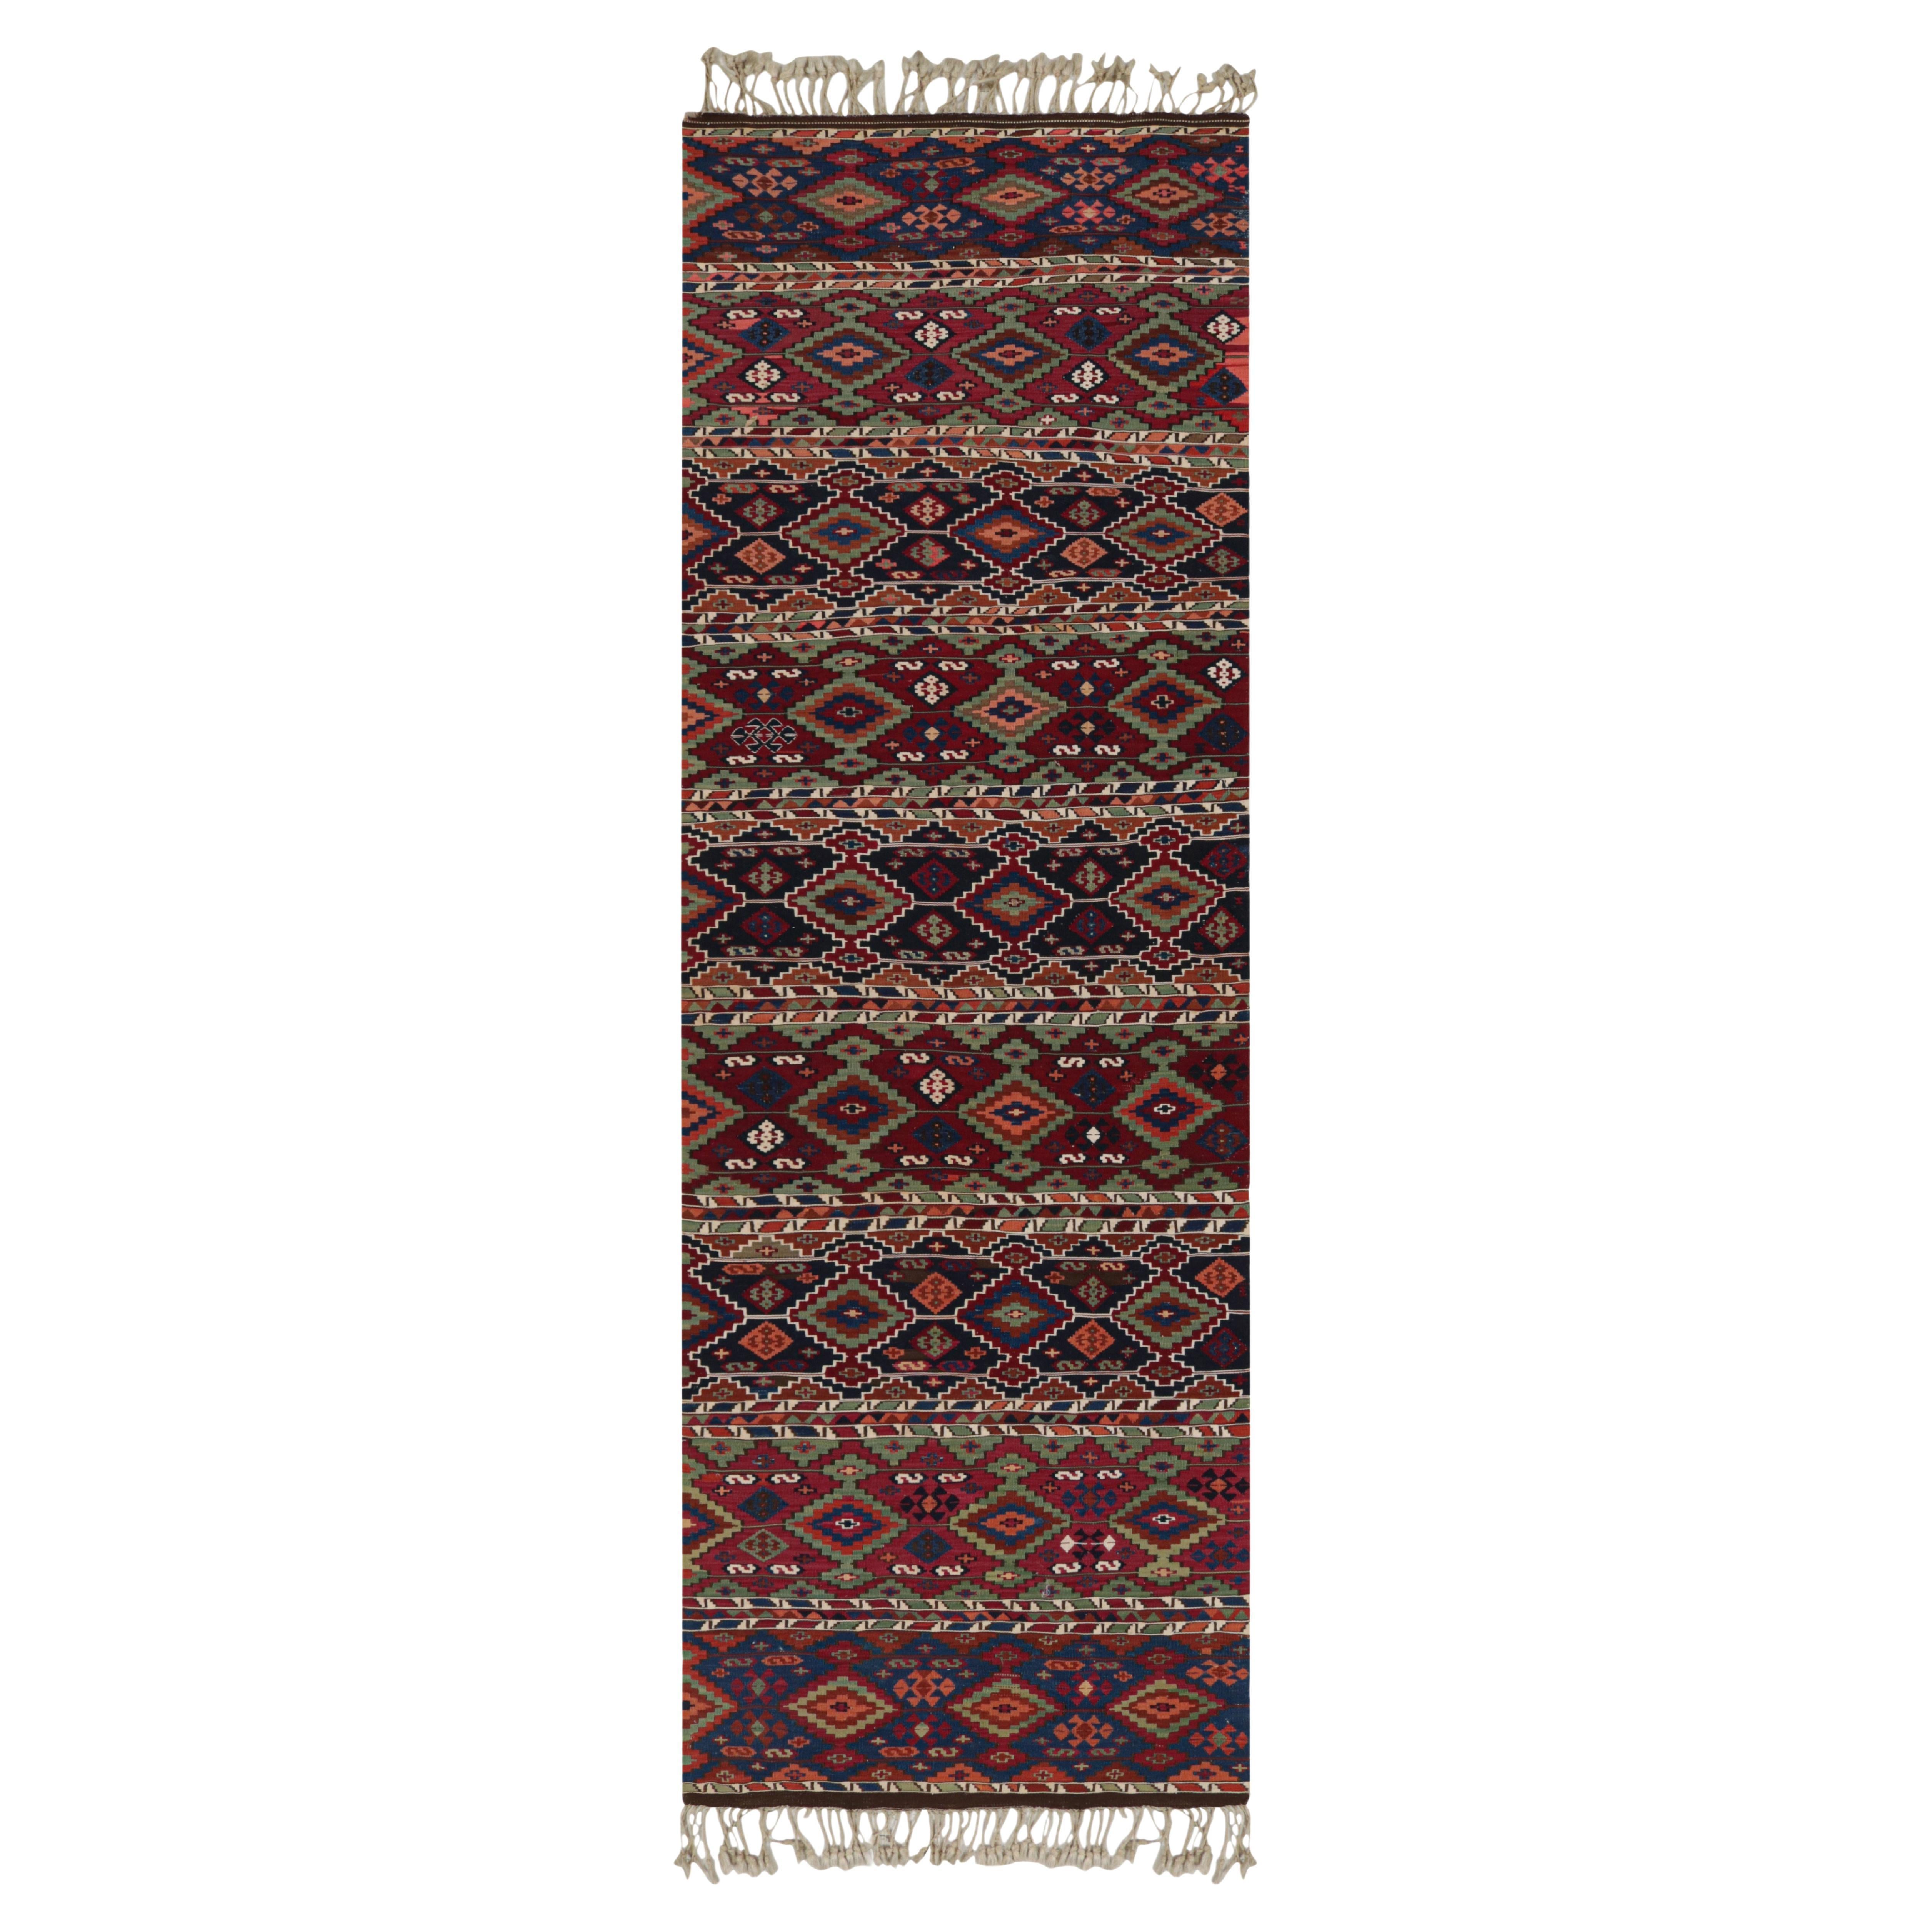 Antique Turkish Red and Blue Multi-Color Wool Kilim Rug by Rug & Kilim For Sale